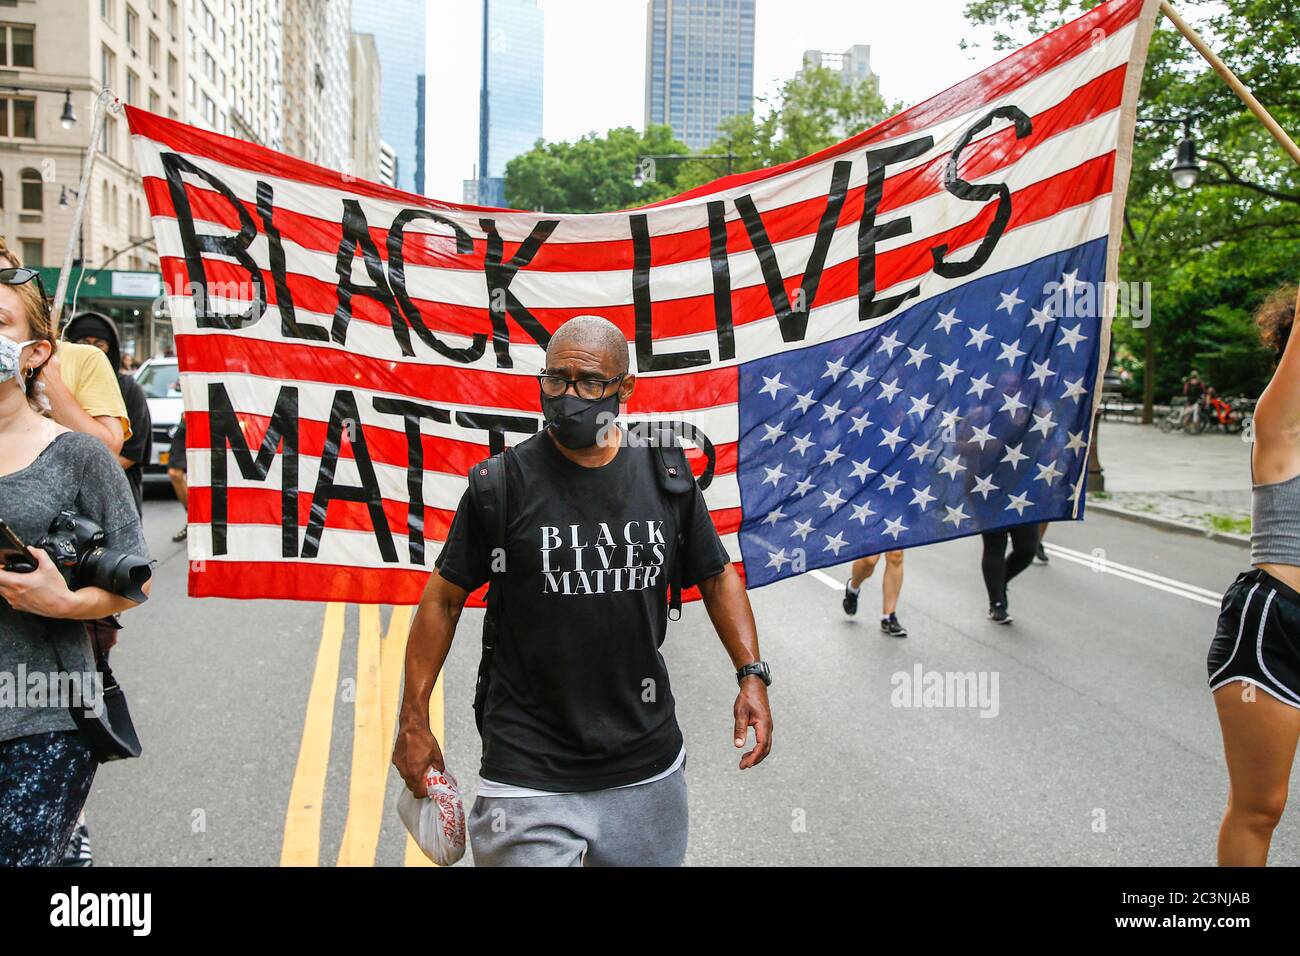 Demonstrator walks in front of an upside down American flag during the protest. Hundredths demonstrate in New York against President Trump's Fascist KKKAMPAIN and Black Lives Matter march on Juneteenth weekend. Demonstrators continue to march against police brutality and racial injustice across America. Stock Photo